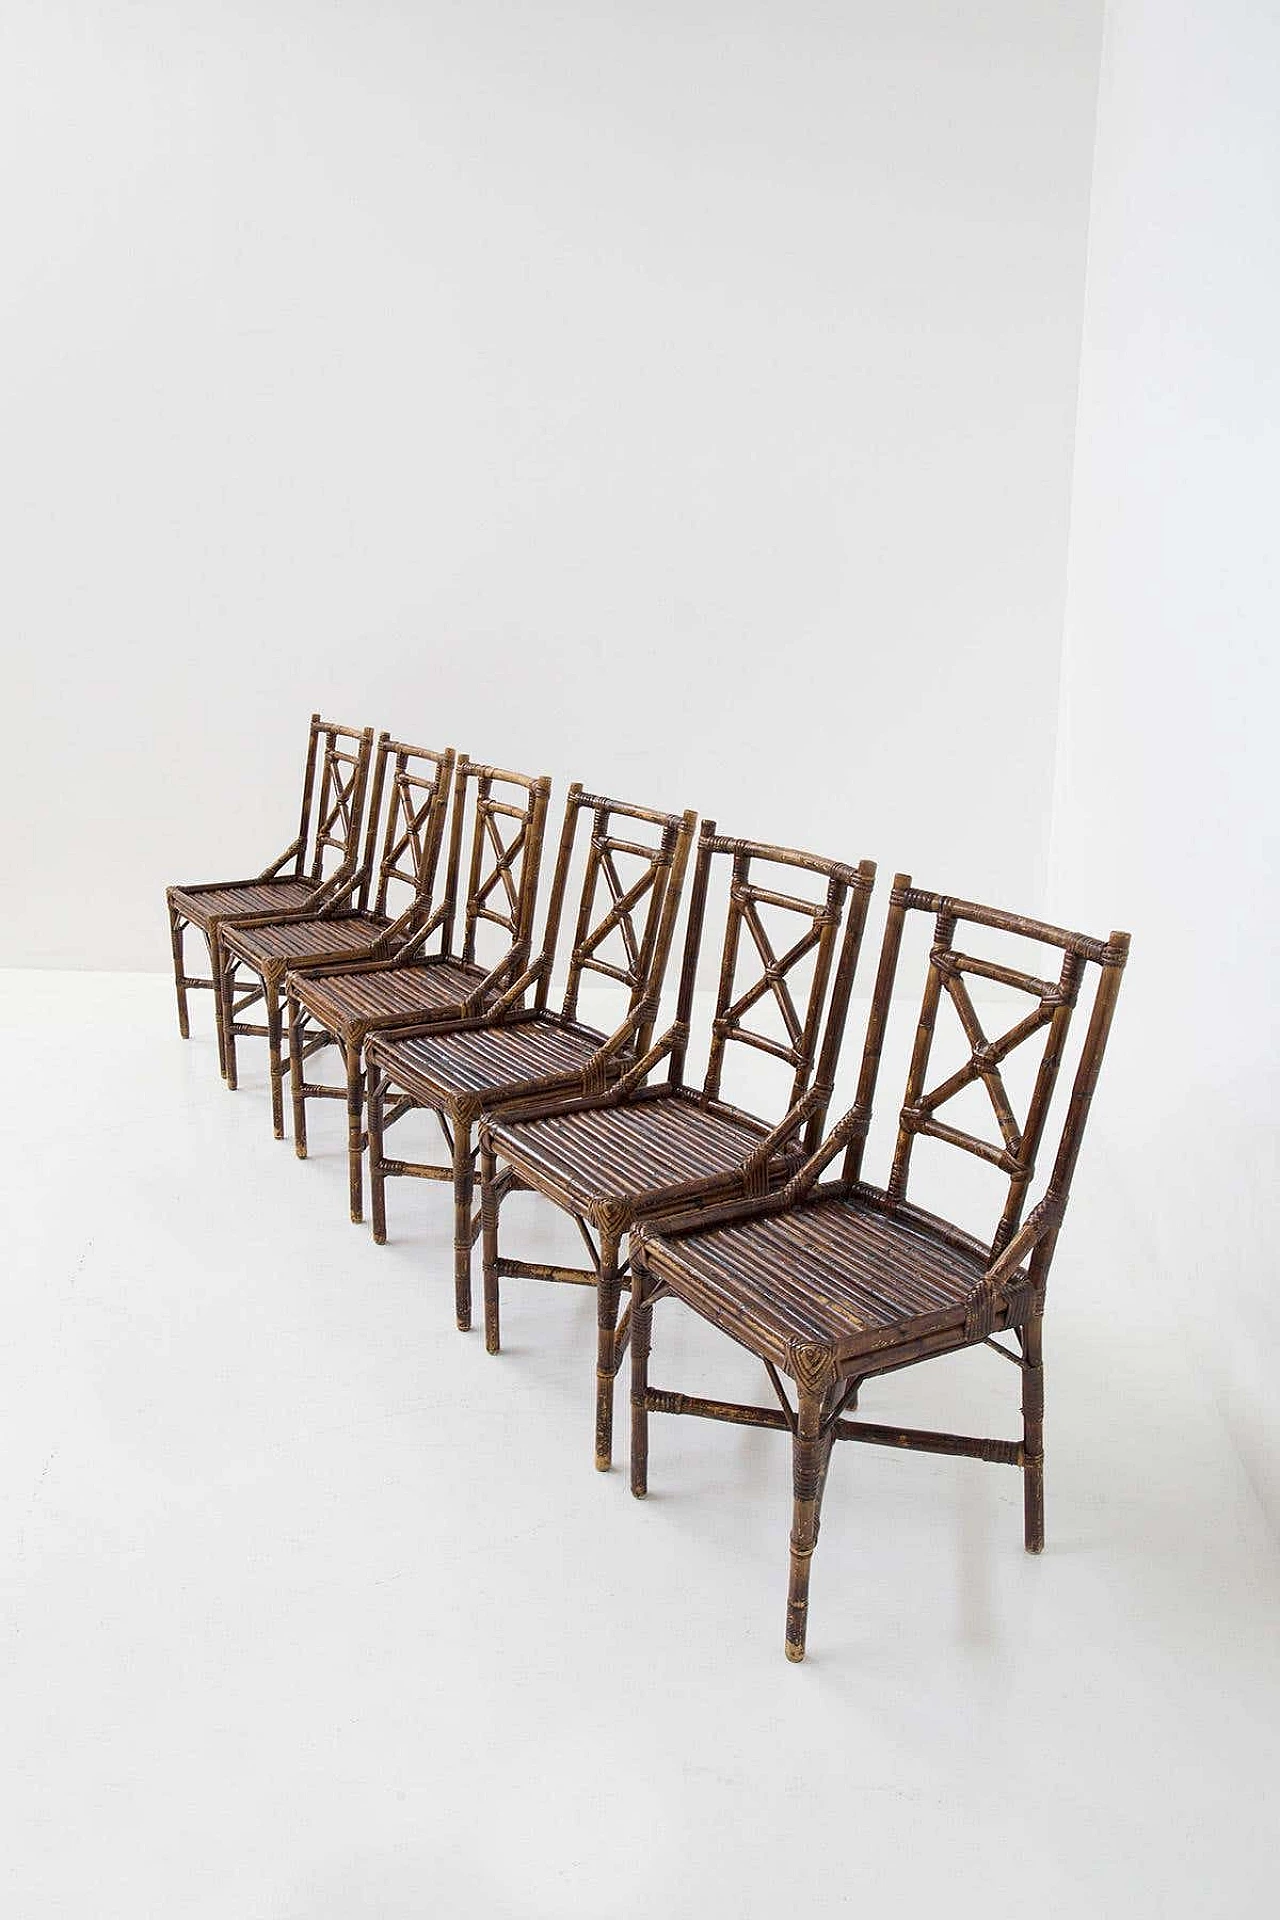 6 Varnished bamboo cane chairs by Vivai del Sud, 1970s 6